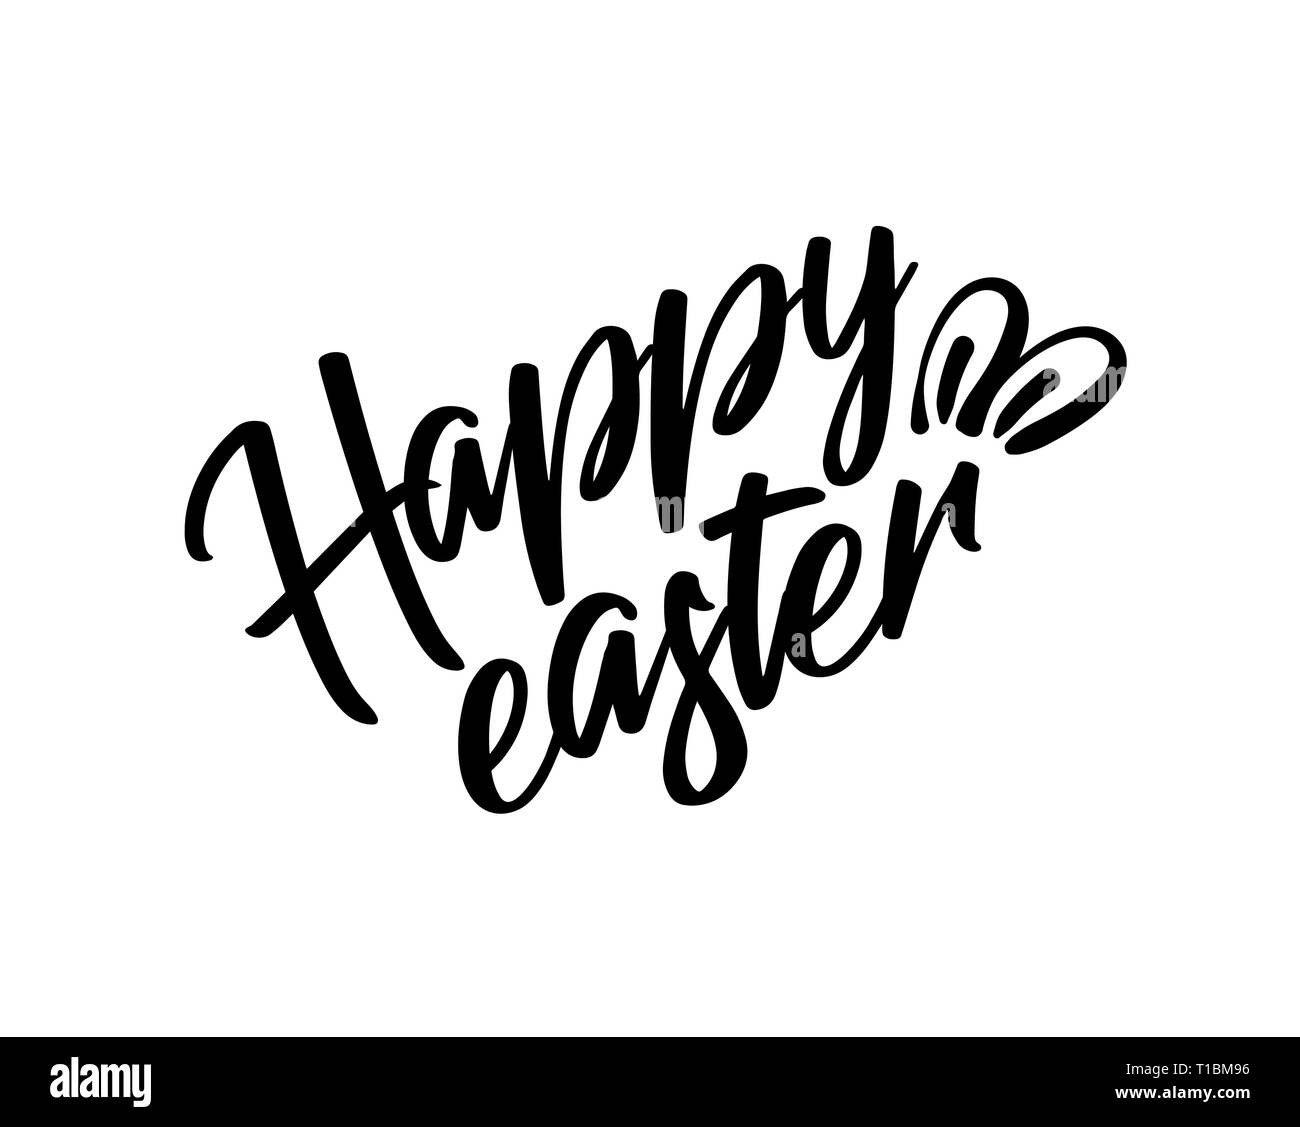 Happy easter black lettering, text with rabbit ears isolated, design for holiday greeting card or invitation, vector Stock Vector